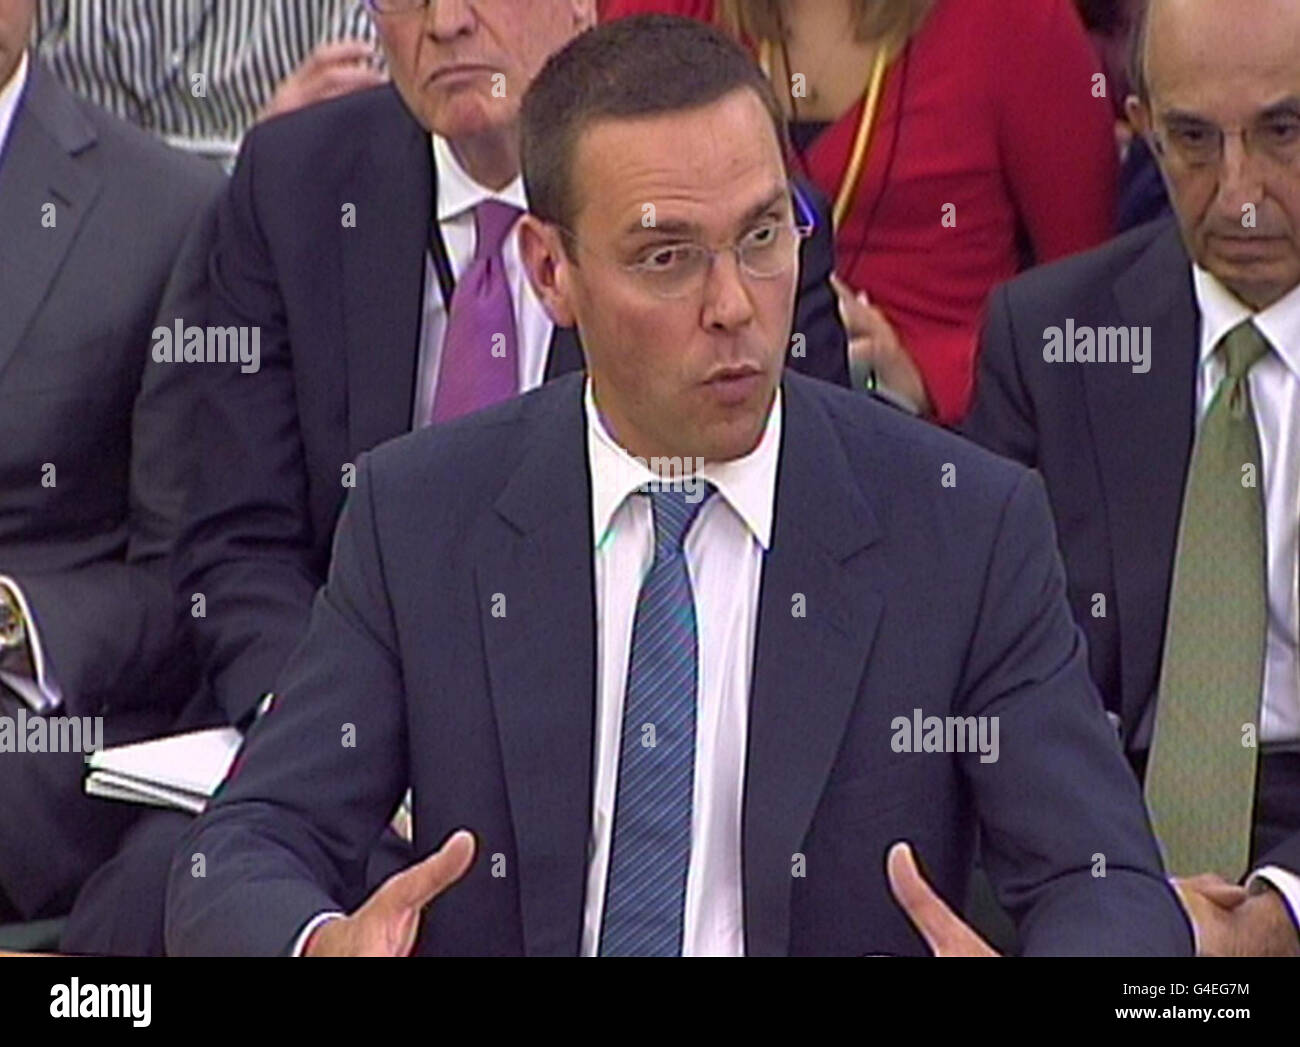 James Murdoch, Deputy Chief Operating Officer and Chairman and Chief Executive Officer, International News Corporation and Rupert Murdoch, Chairman giving evidence to the Culture, Media and Sport Select Committee in the House of Commons in central London on the News of the World phone-hacking scandal. Stock Photo